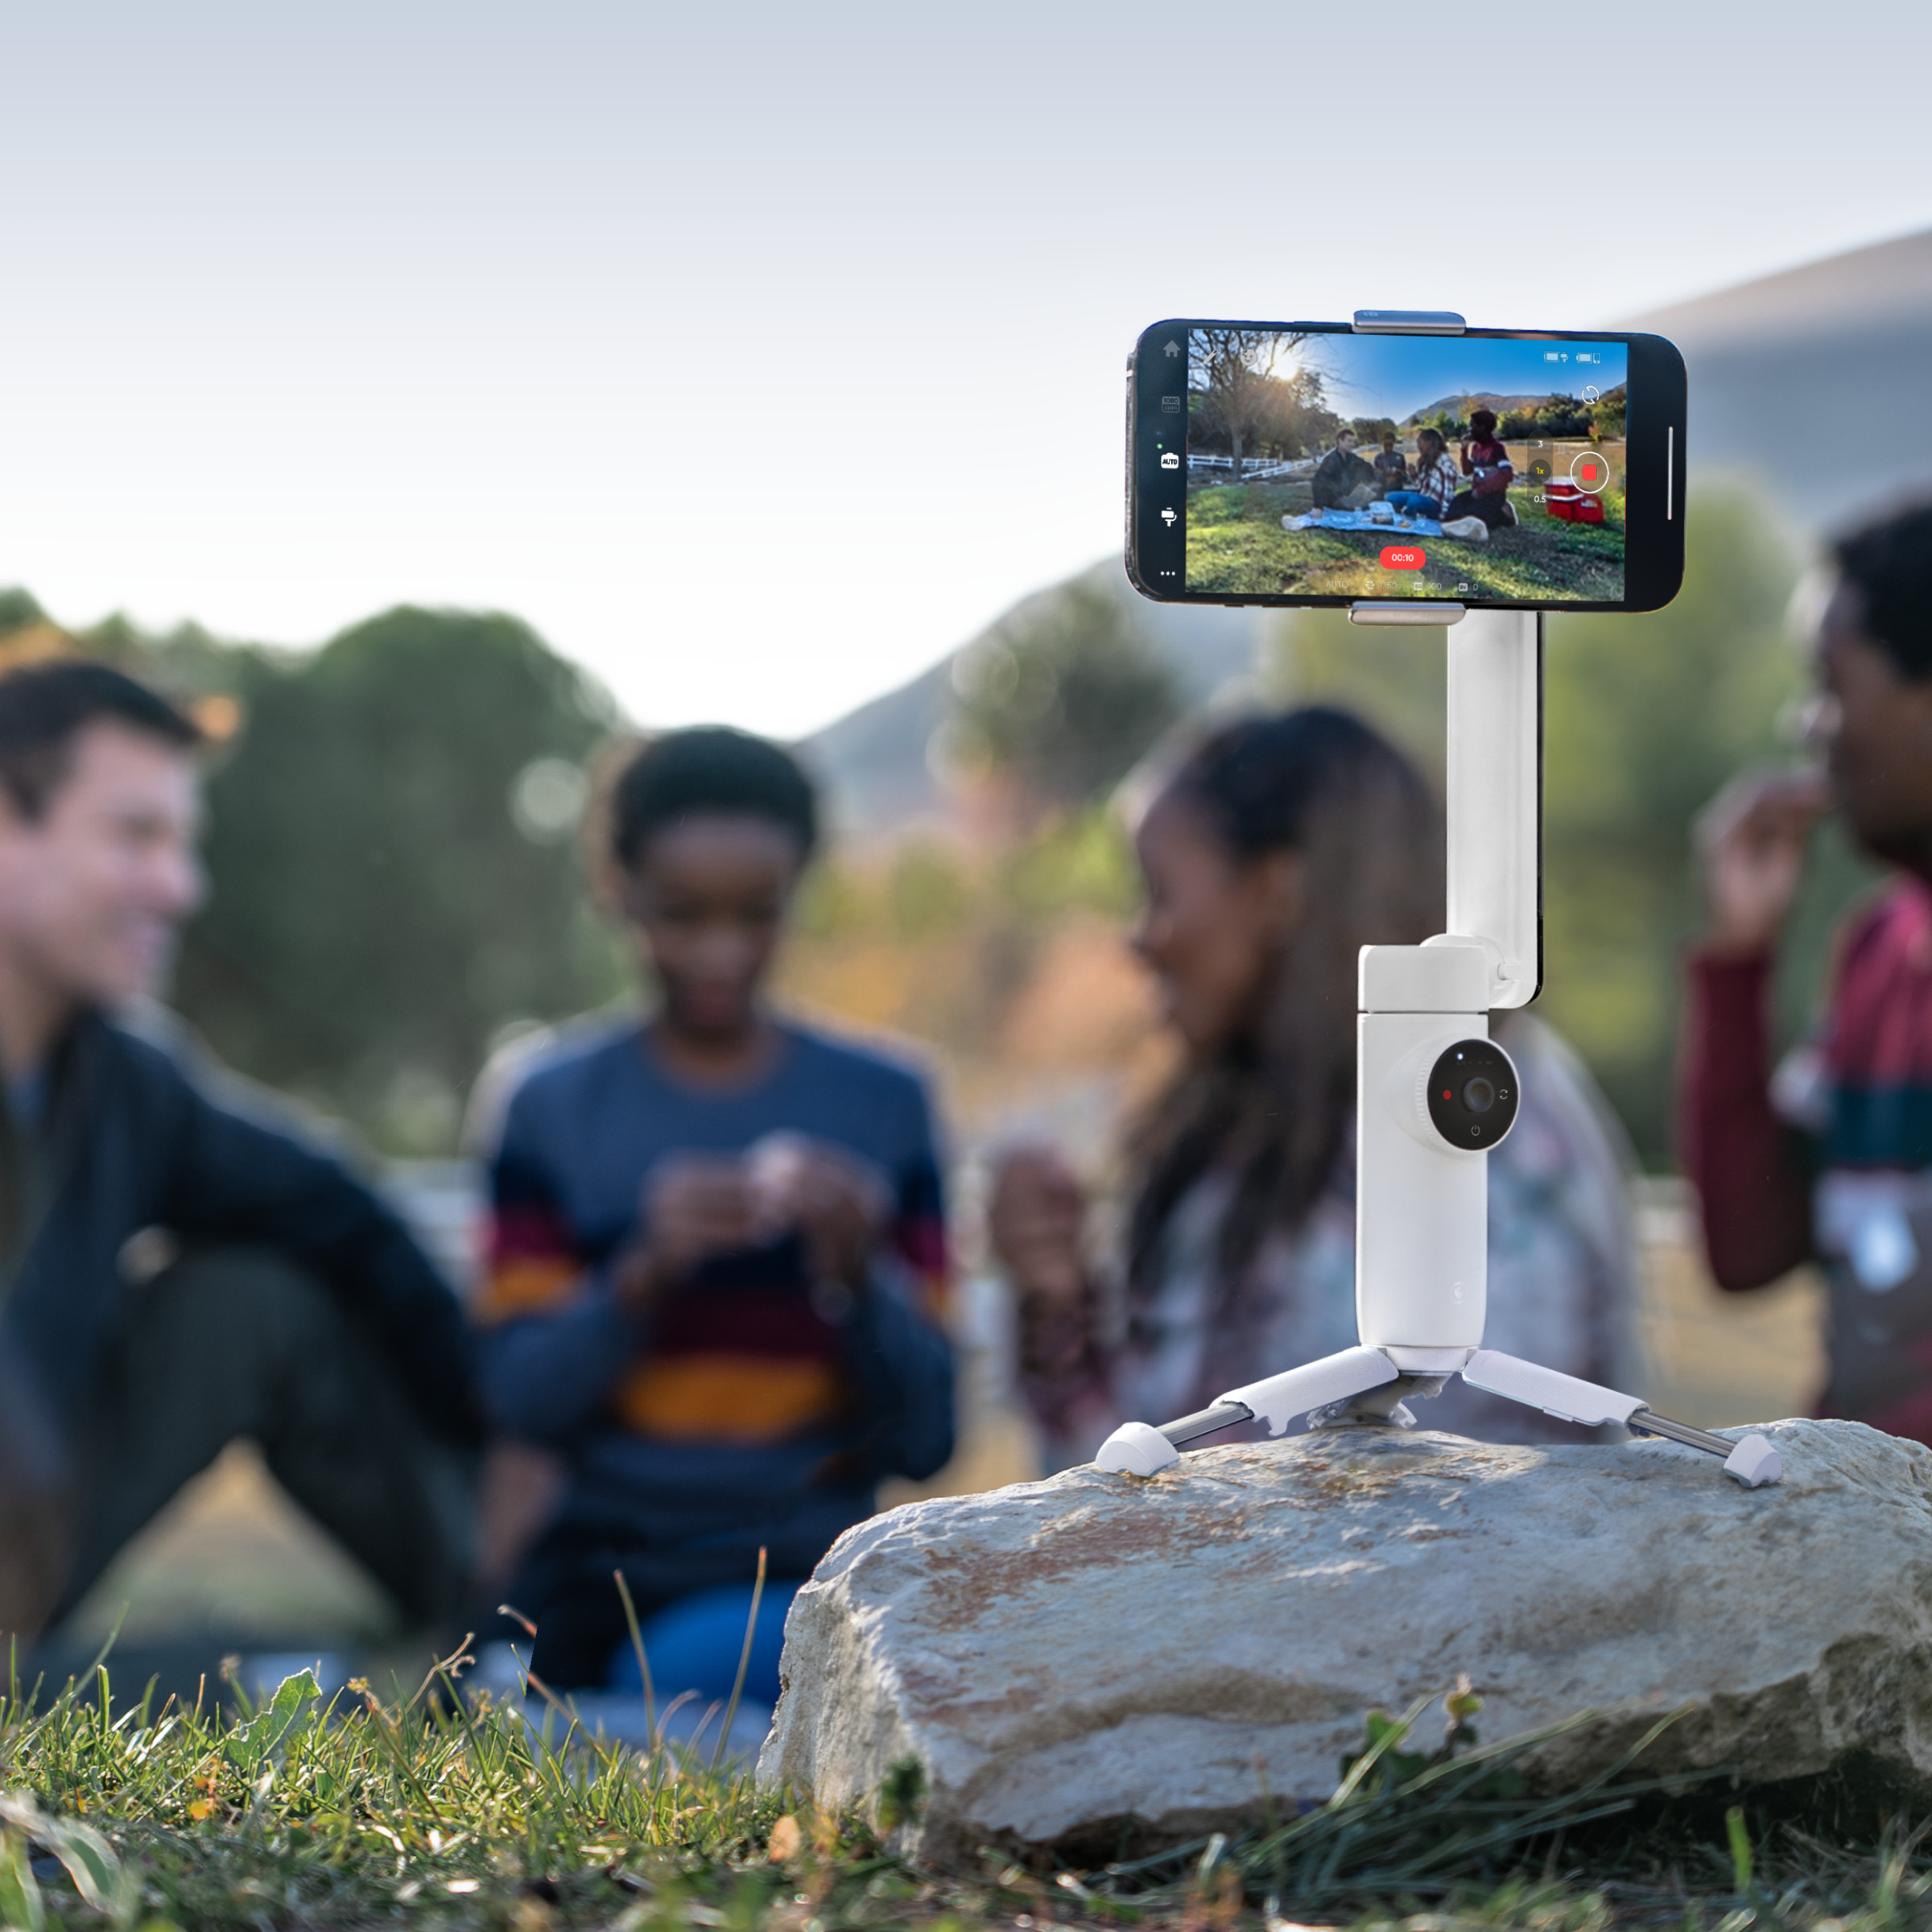 The Insta360 Flow stood on its tripod filming a scene.